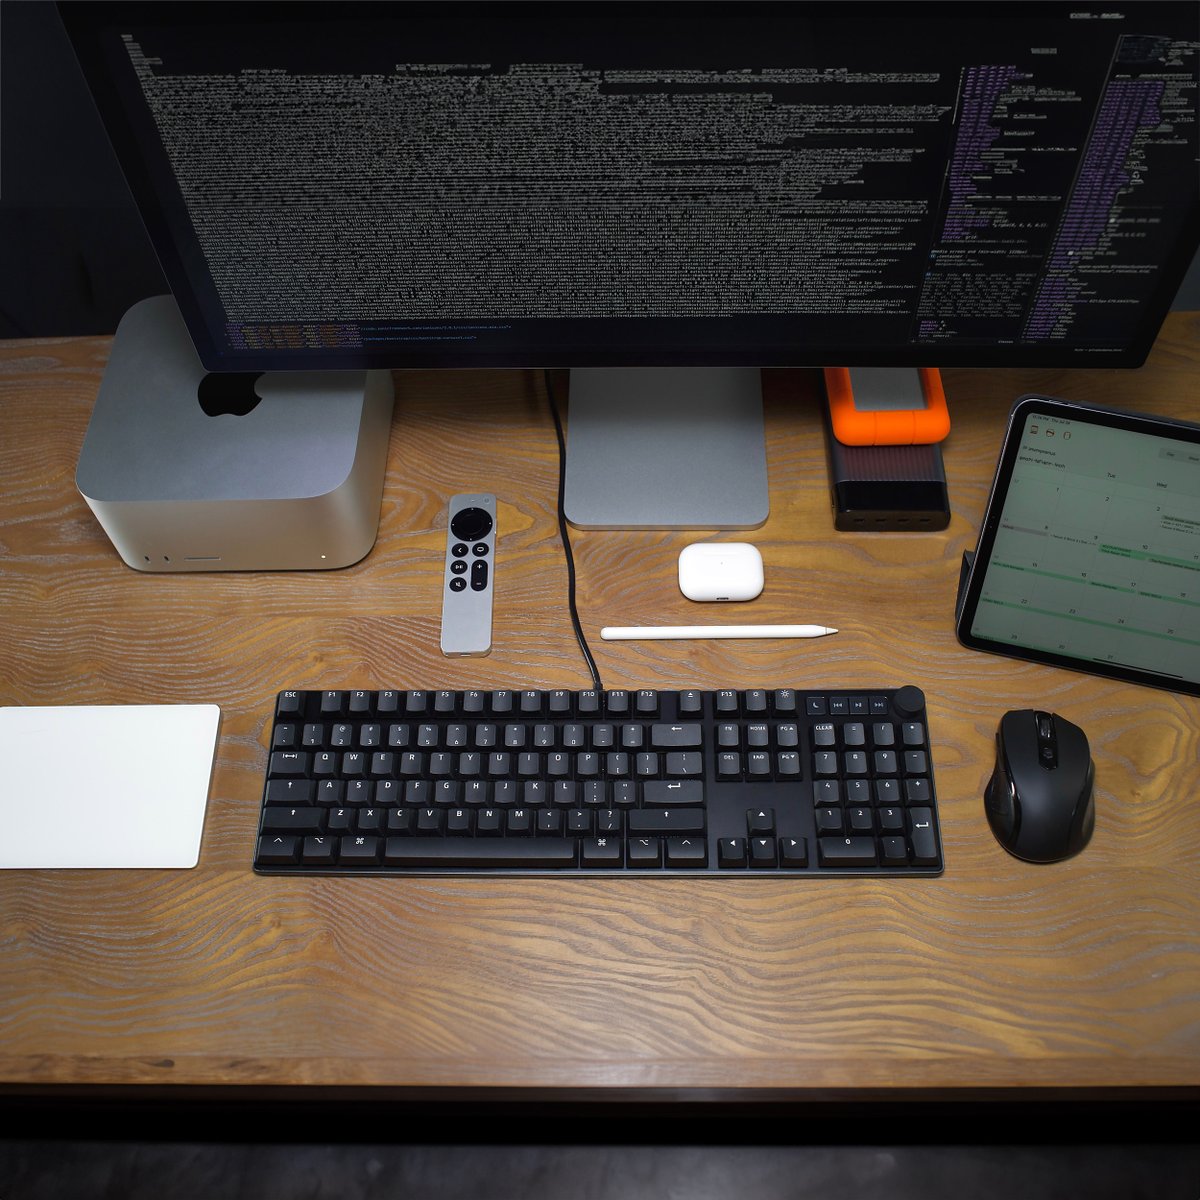 Hardcore Mac users see what's going on in this setup. Visit this link to share your setup with the Das Keyboard community: docs.google.com/forms/d/e/1FAI… 
#MacSetup #MacUsers #CreativeWorkspace #AppleSetup #ProductivityTools #TechSetup #HomeOffice #DeskGoals